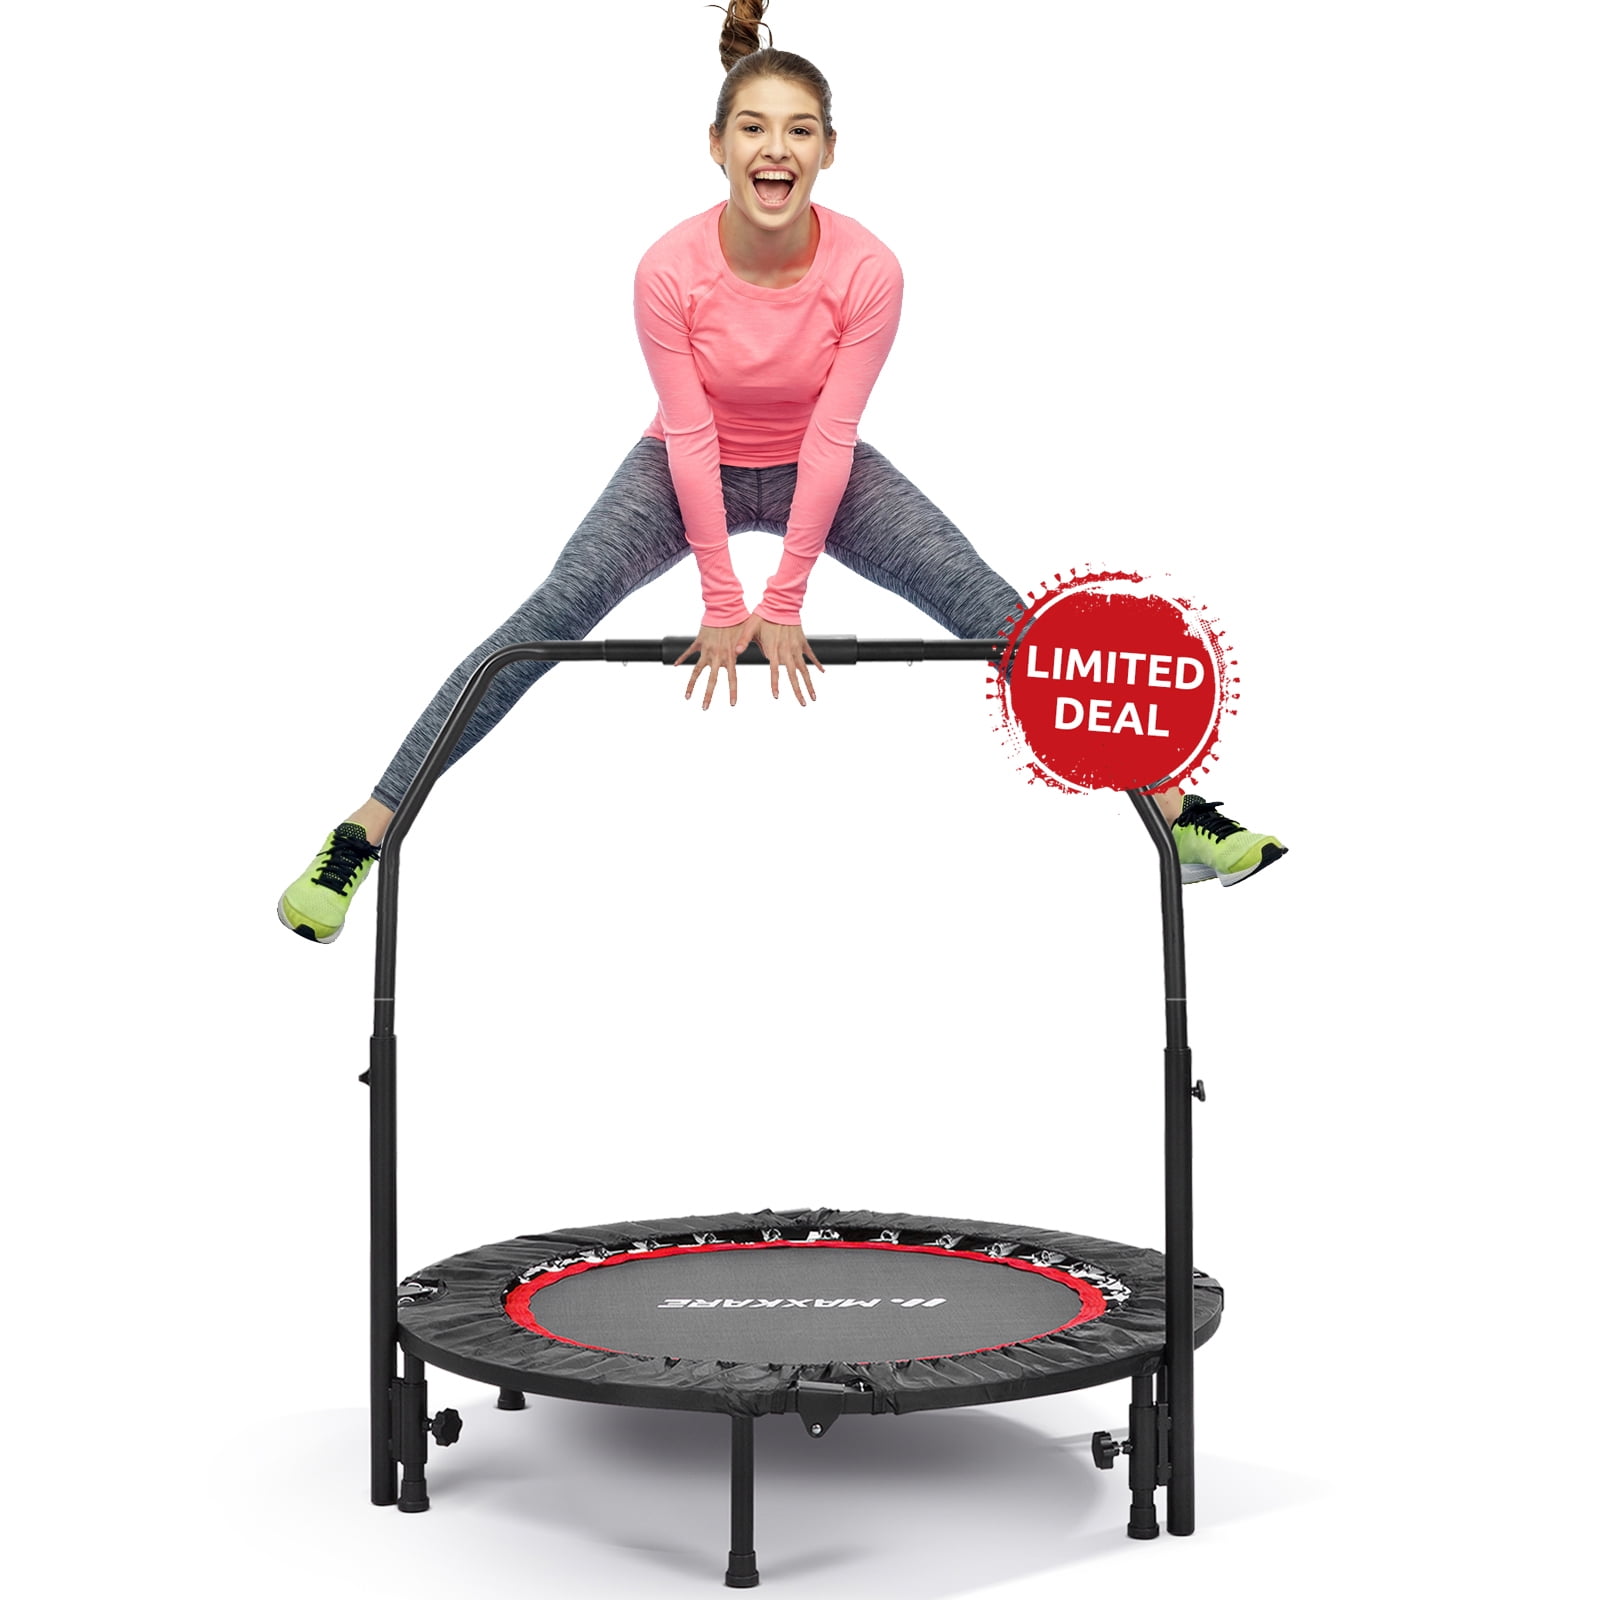 OUHOUG 40 Foldable Mini Trampoline，Trampoline for Adults Fitness Rebounder with 5 Levels Adjustable Foam Handle，Exercise Trampoline for Adults Indoor/Garden Workout Max Load 500lbs 